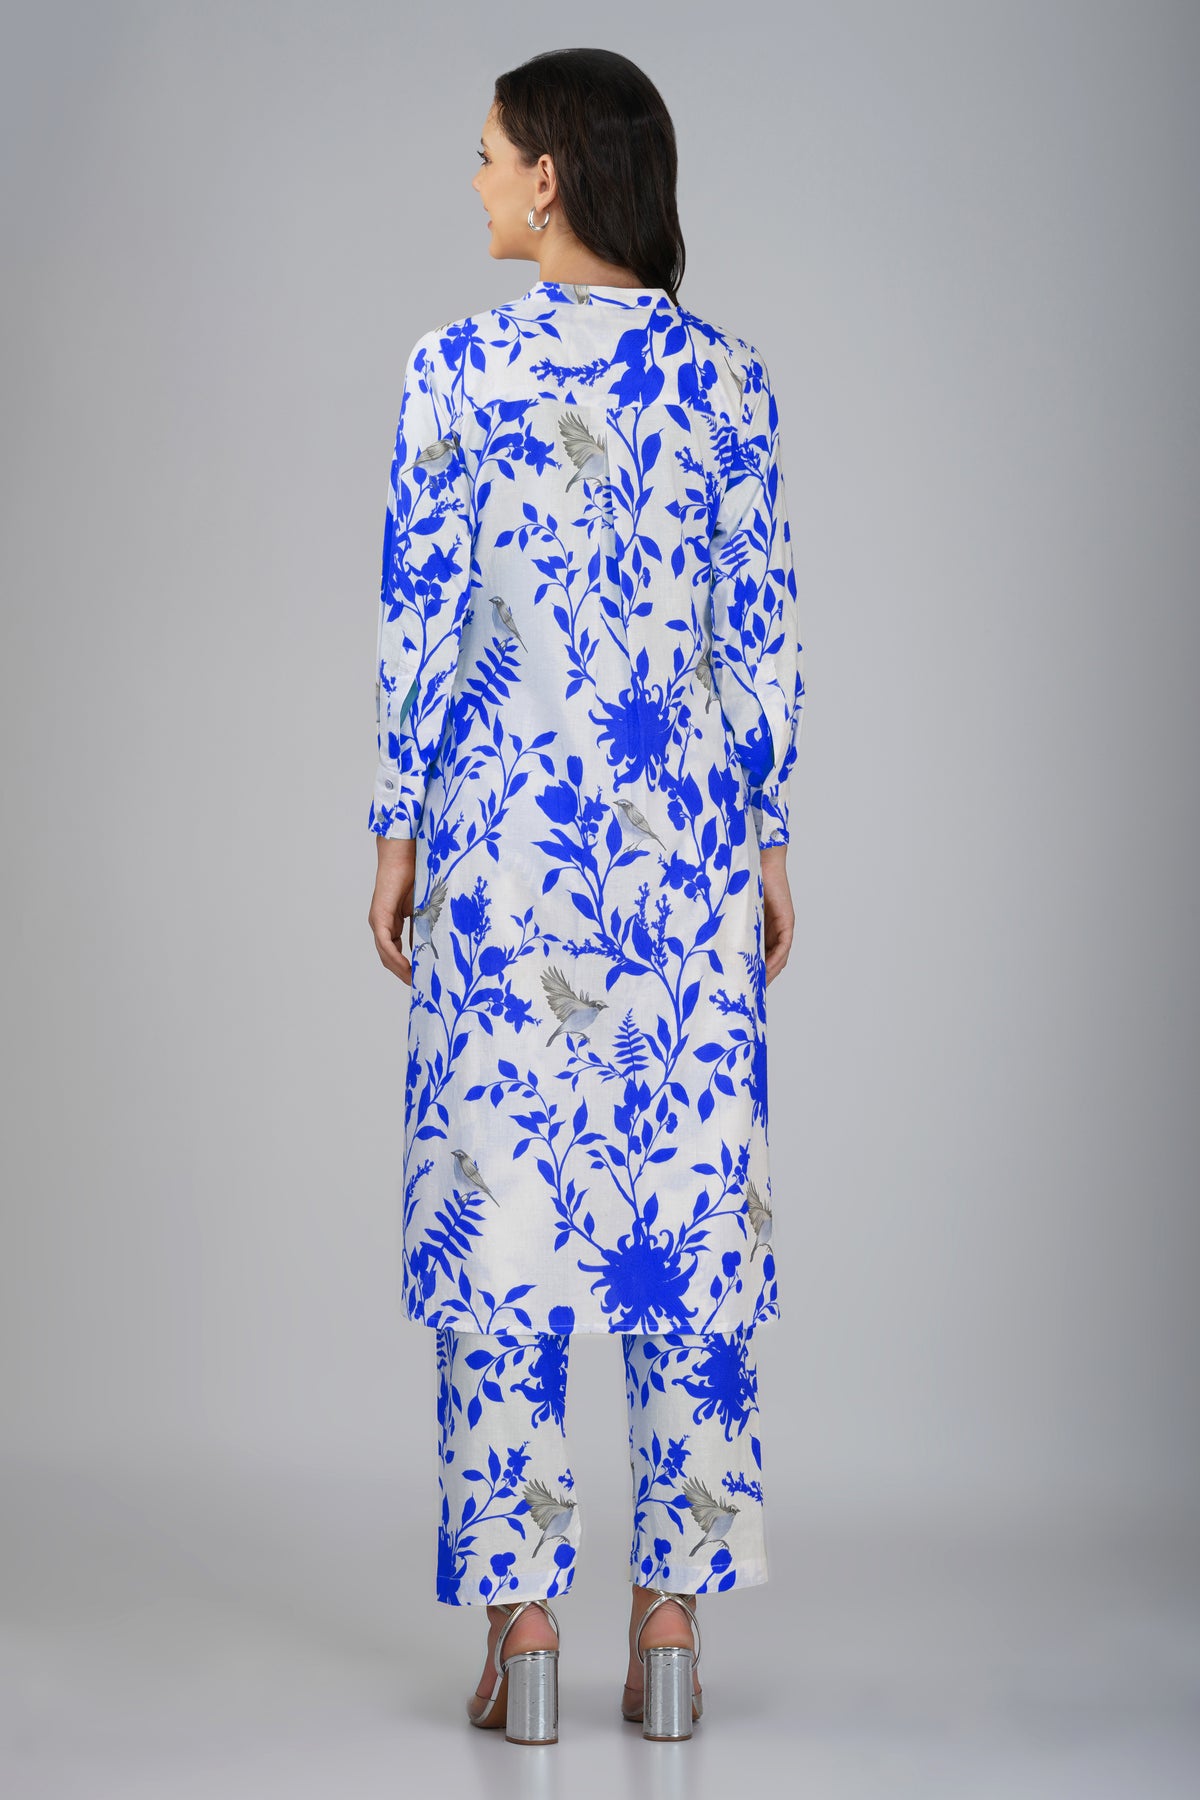 Blue Cotton Printed Co-Ord - Set of 2